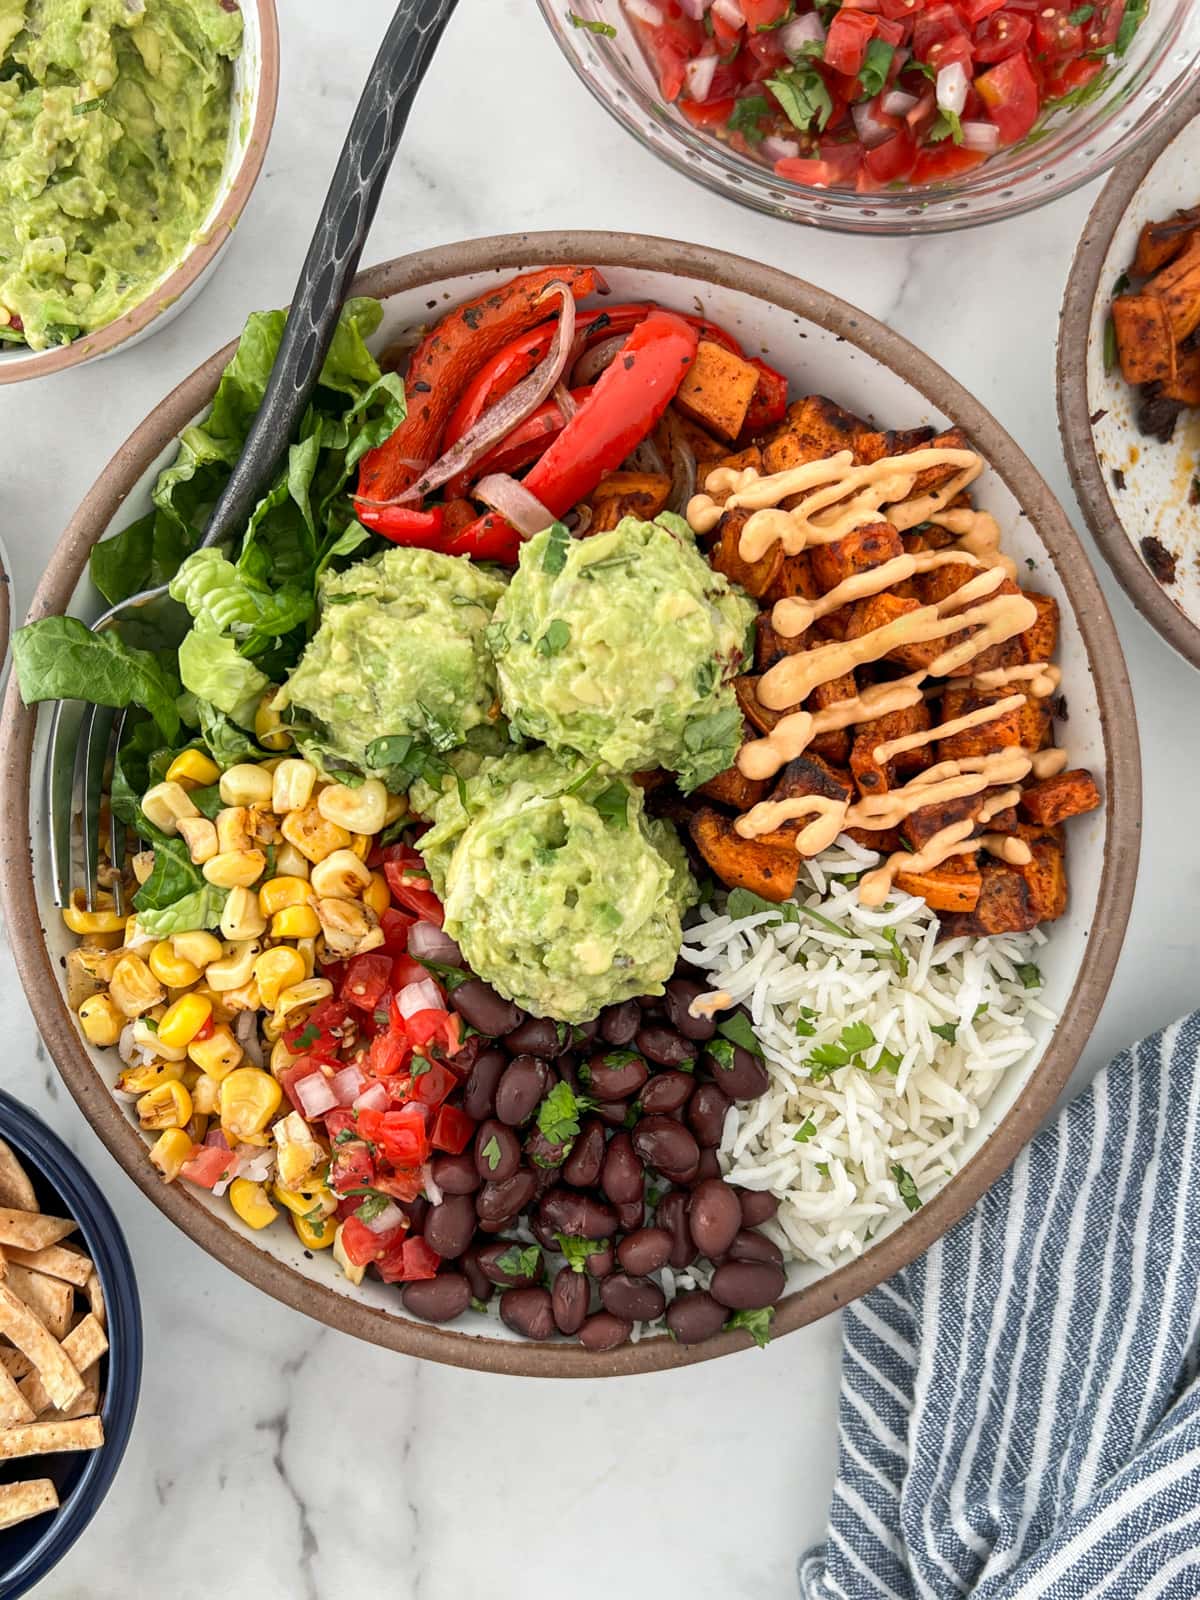 Burrito bowl with black beans, sweet potatoes, corn and balls of guacamole served on rice.